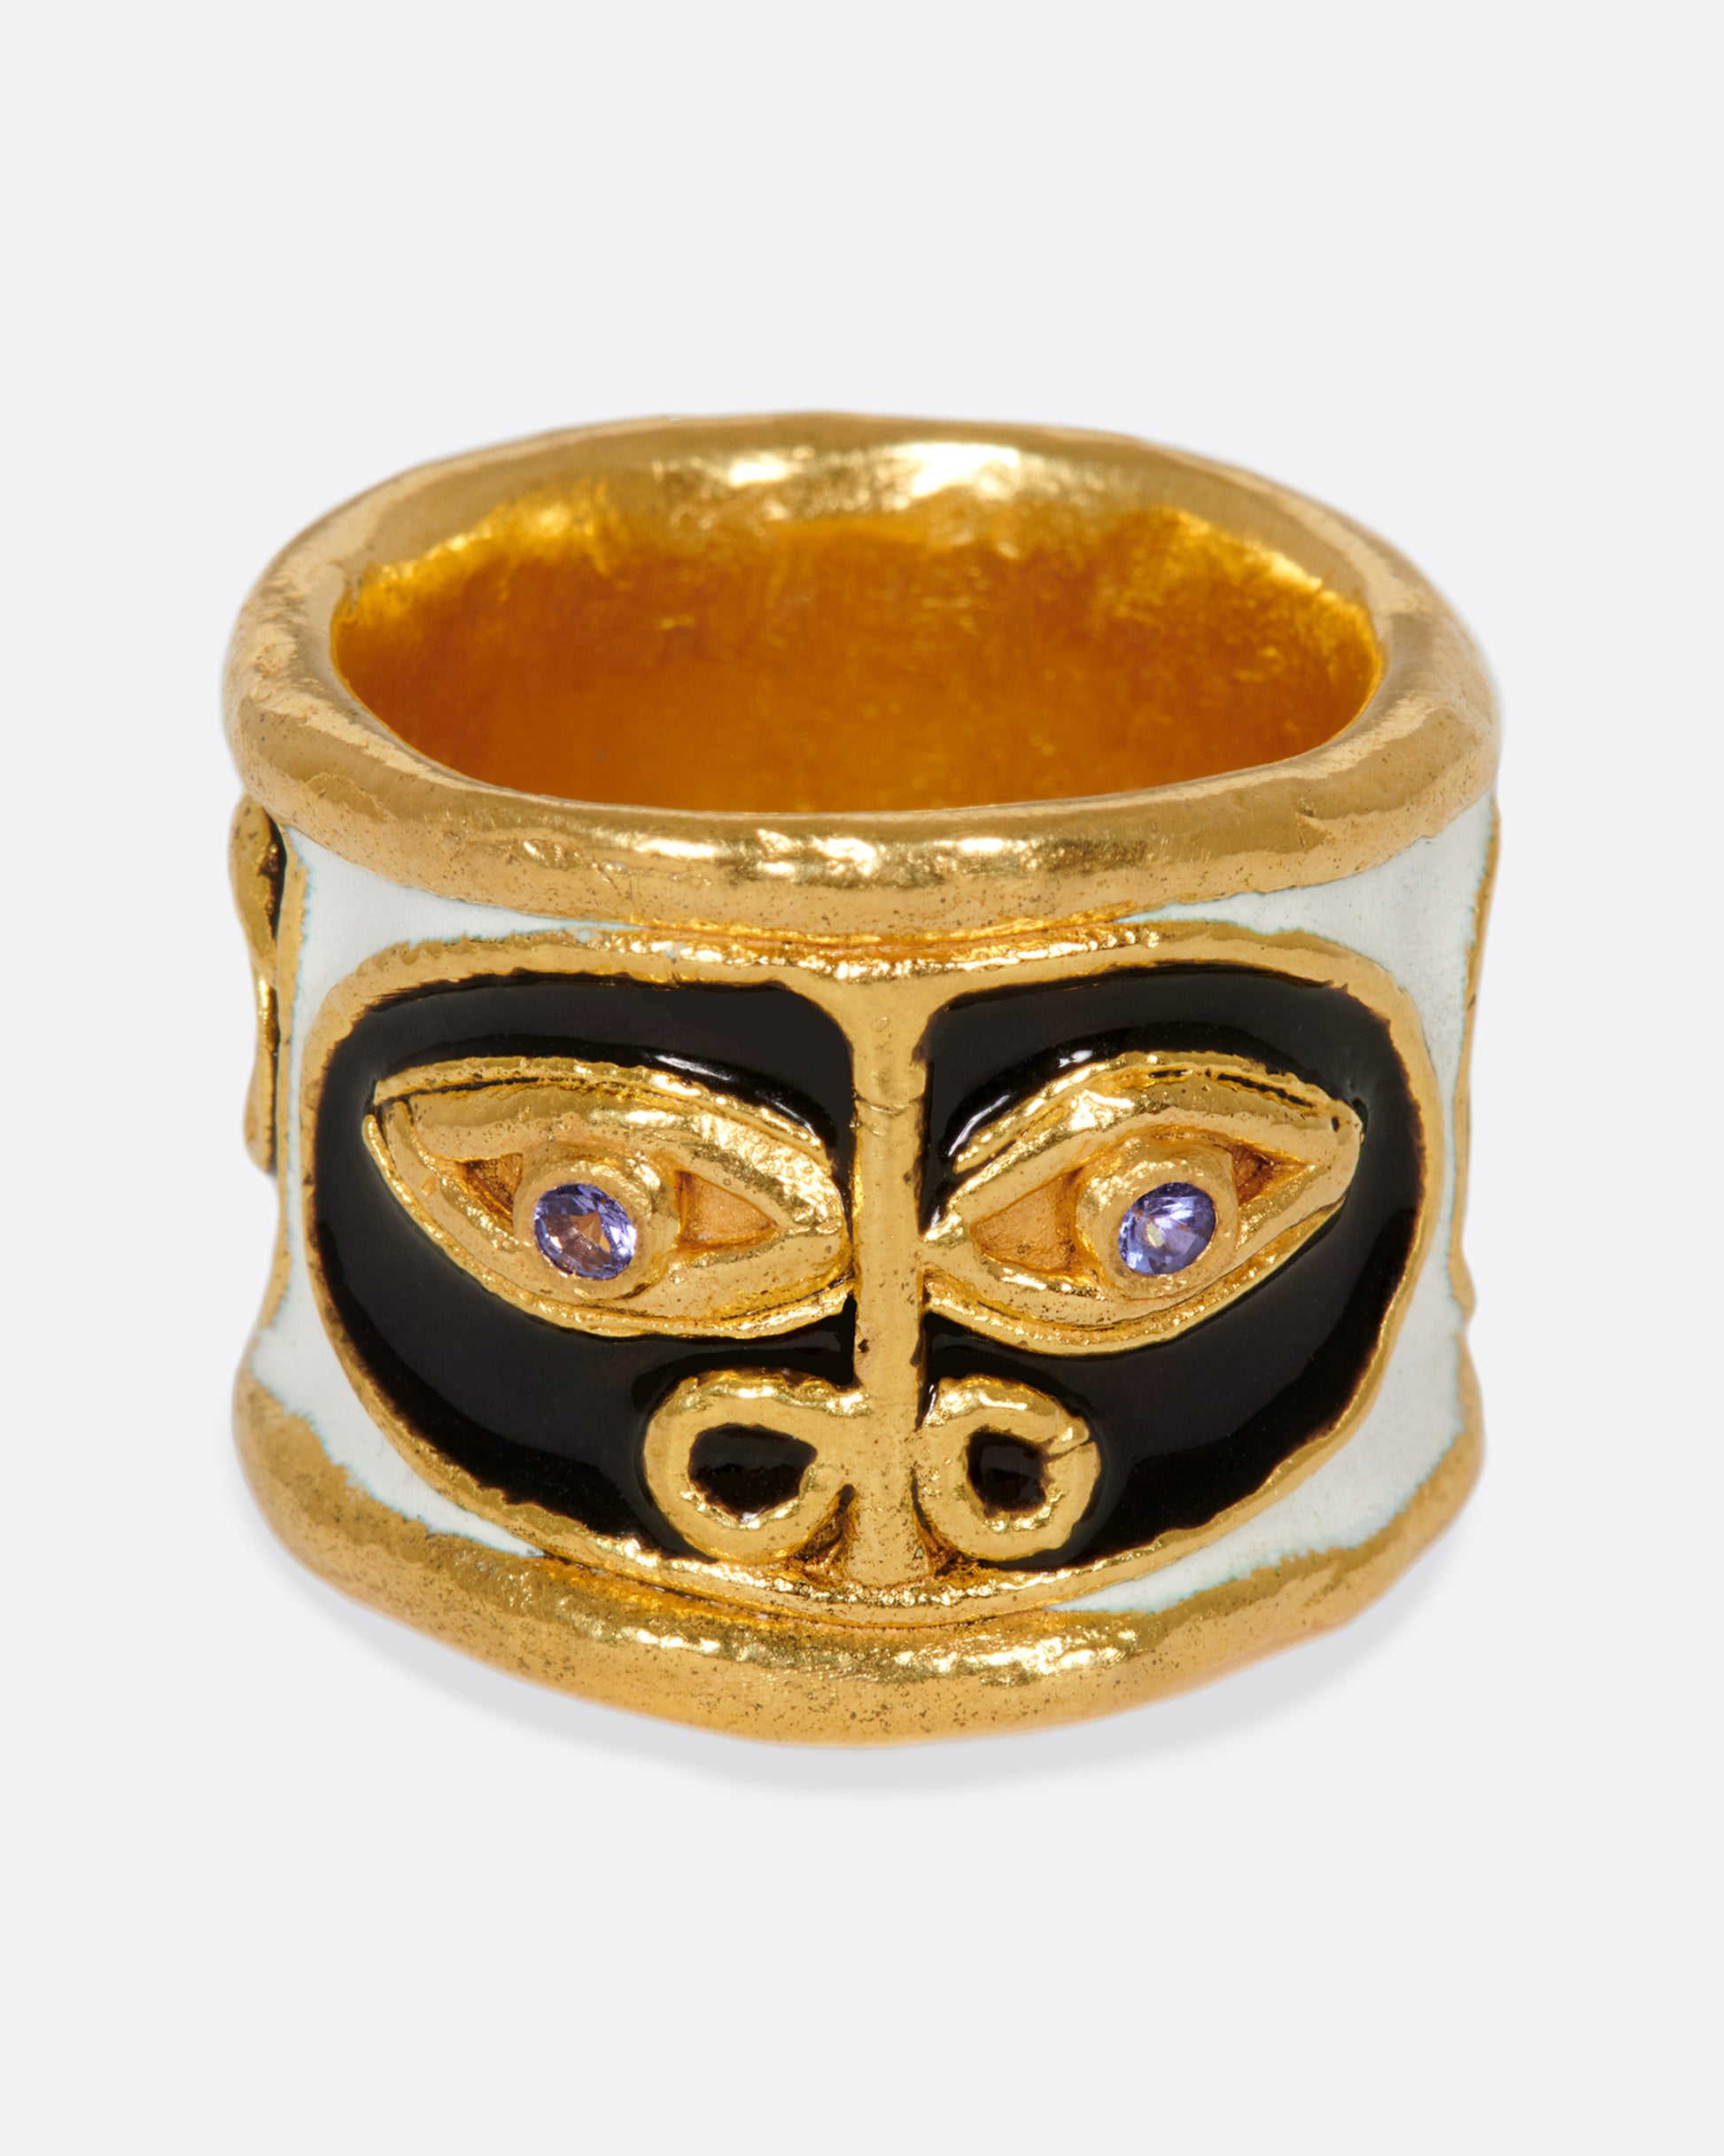 A handcrafted, high karat gold band with three faces illuminated by black and white enamel, and brightly colored stone eyes.